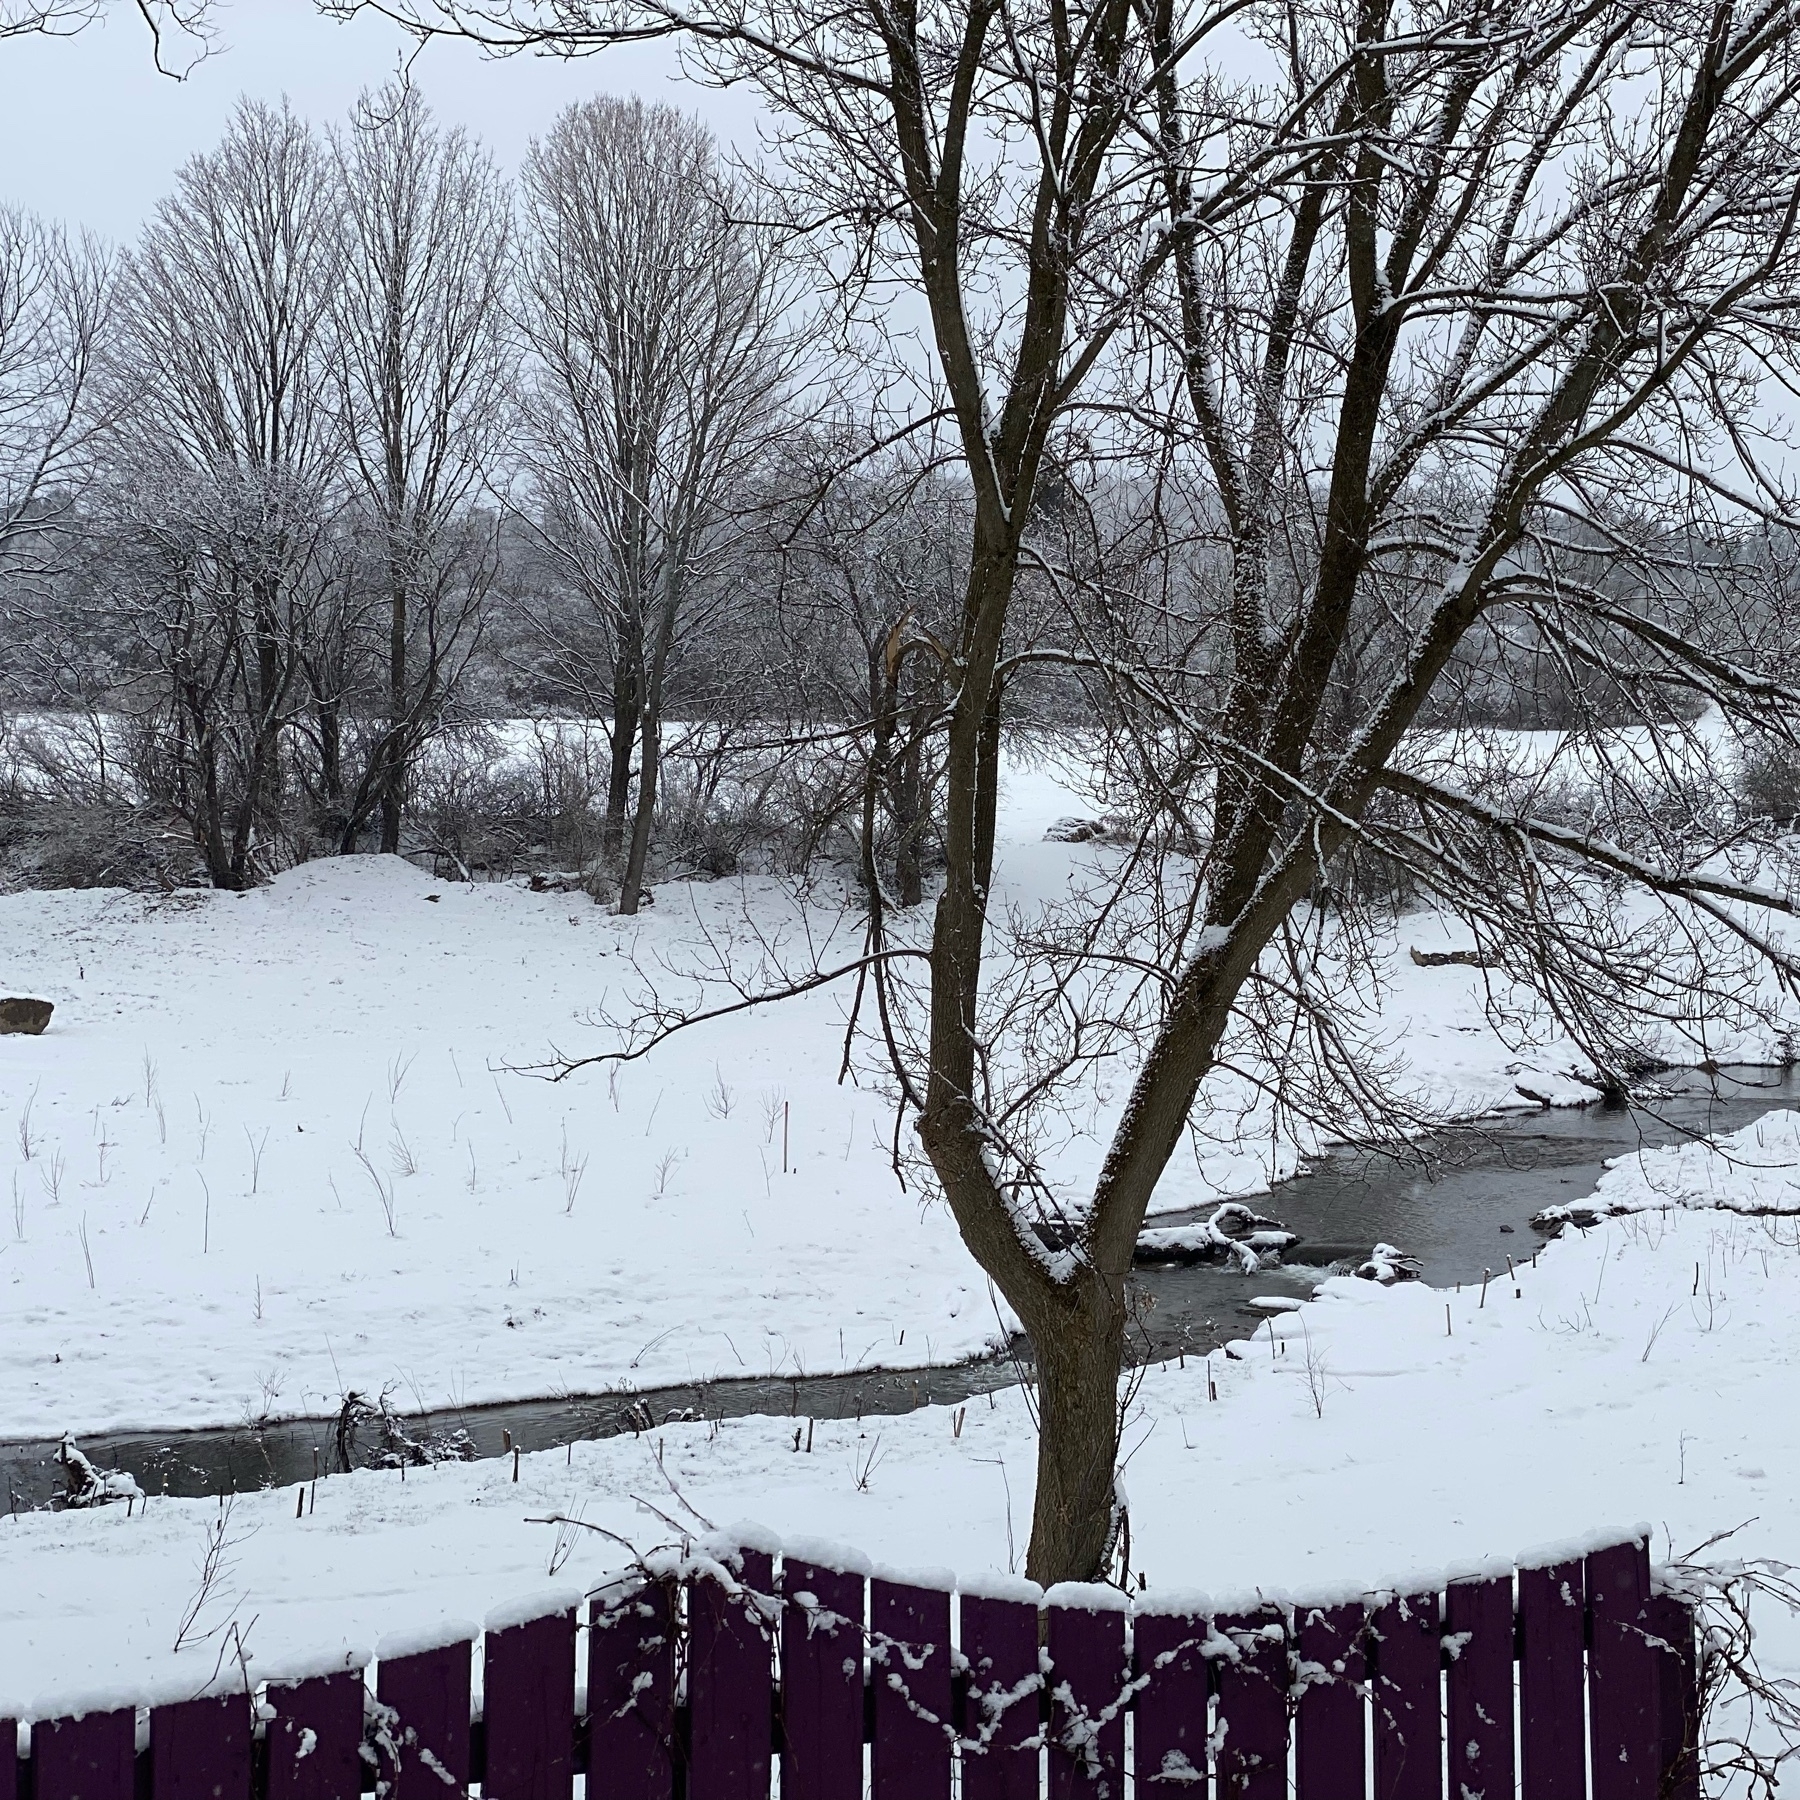 view across a snowy field with a creek meandering through. there is a large tree just off center in front of the creek, and the top of a purple fence is visible at the bottom of the image